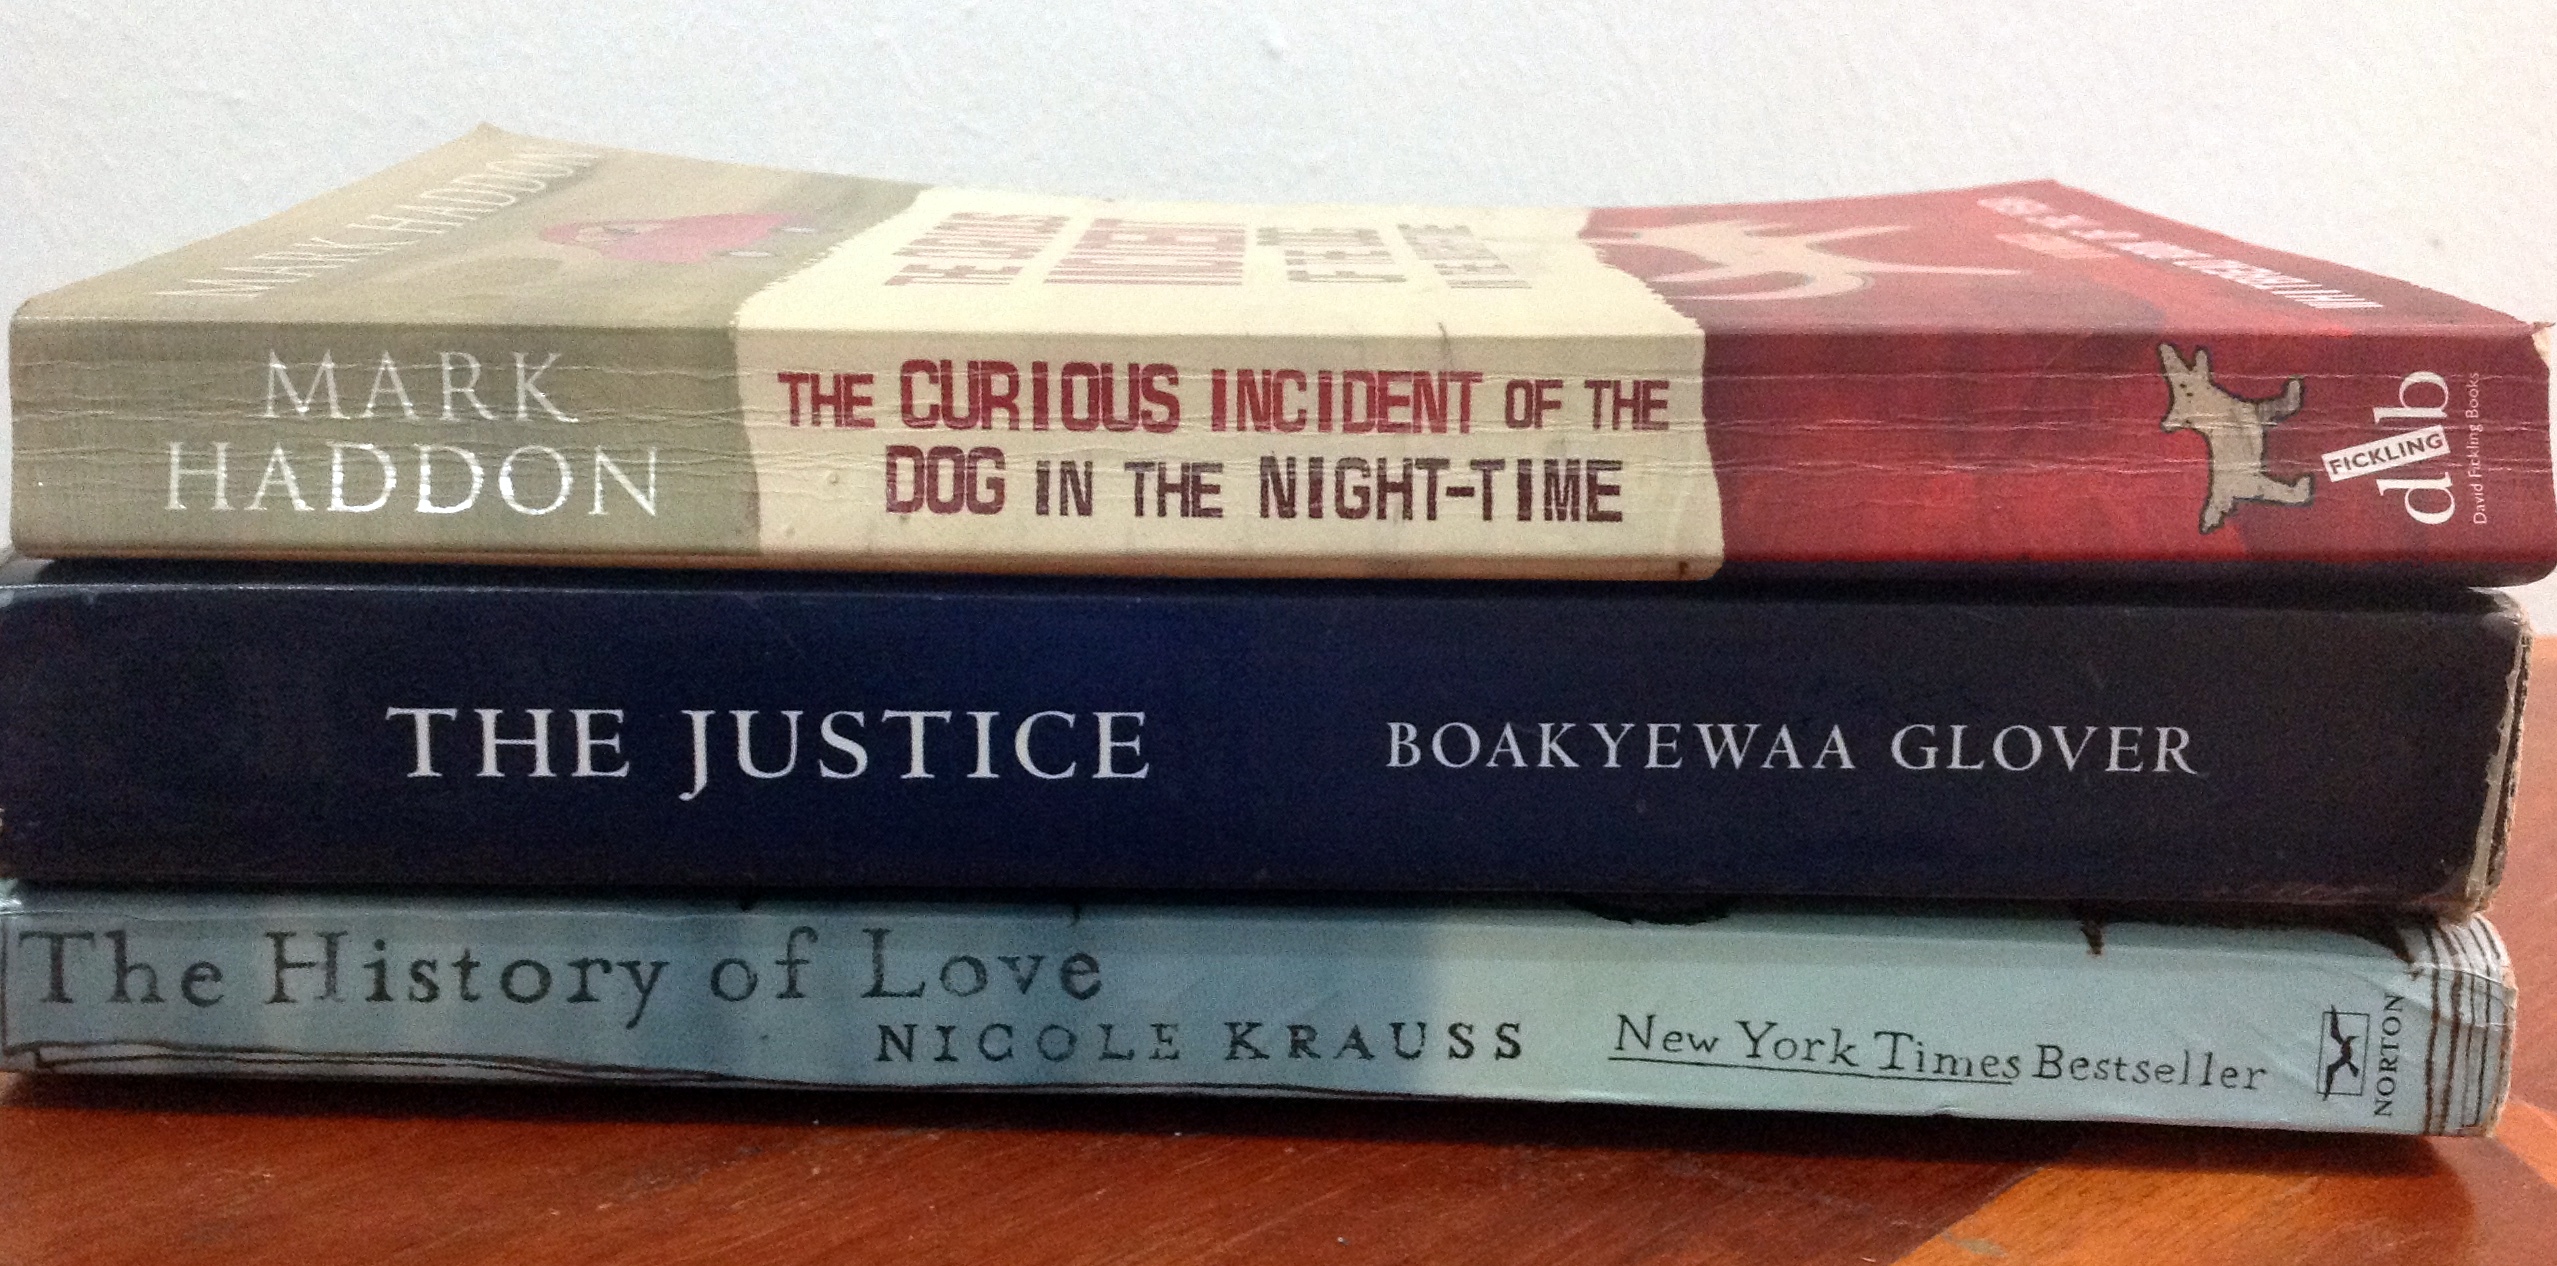 Three mini book reviews – Reading with kids; The Justice; The
History of Love